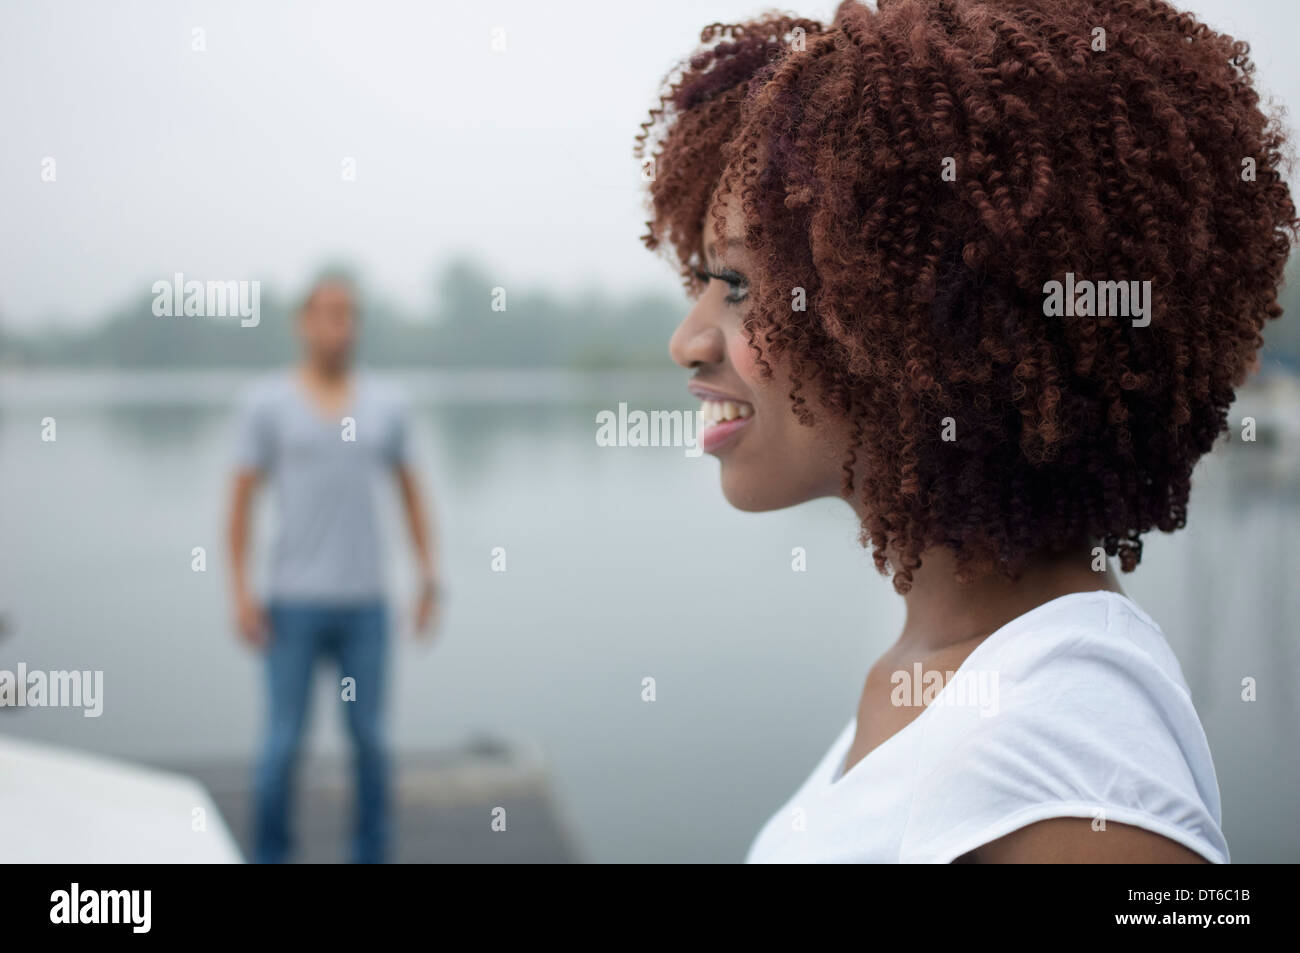 Portrait of young woman smiling with man in background Stock Photo